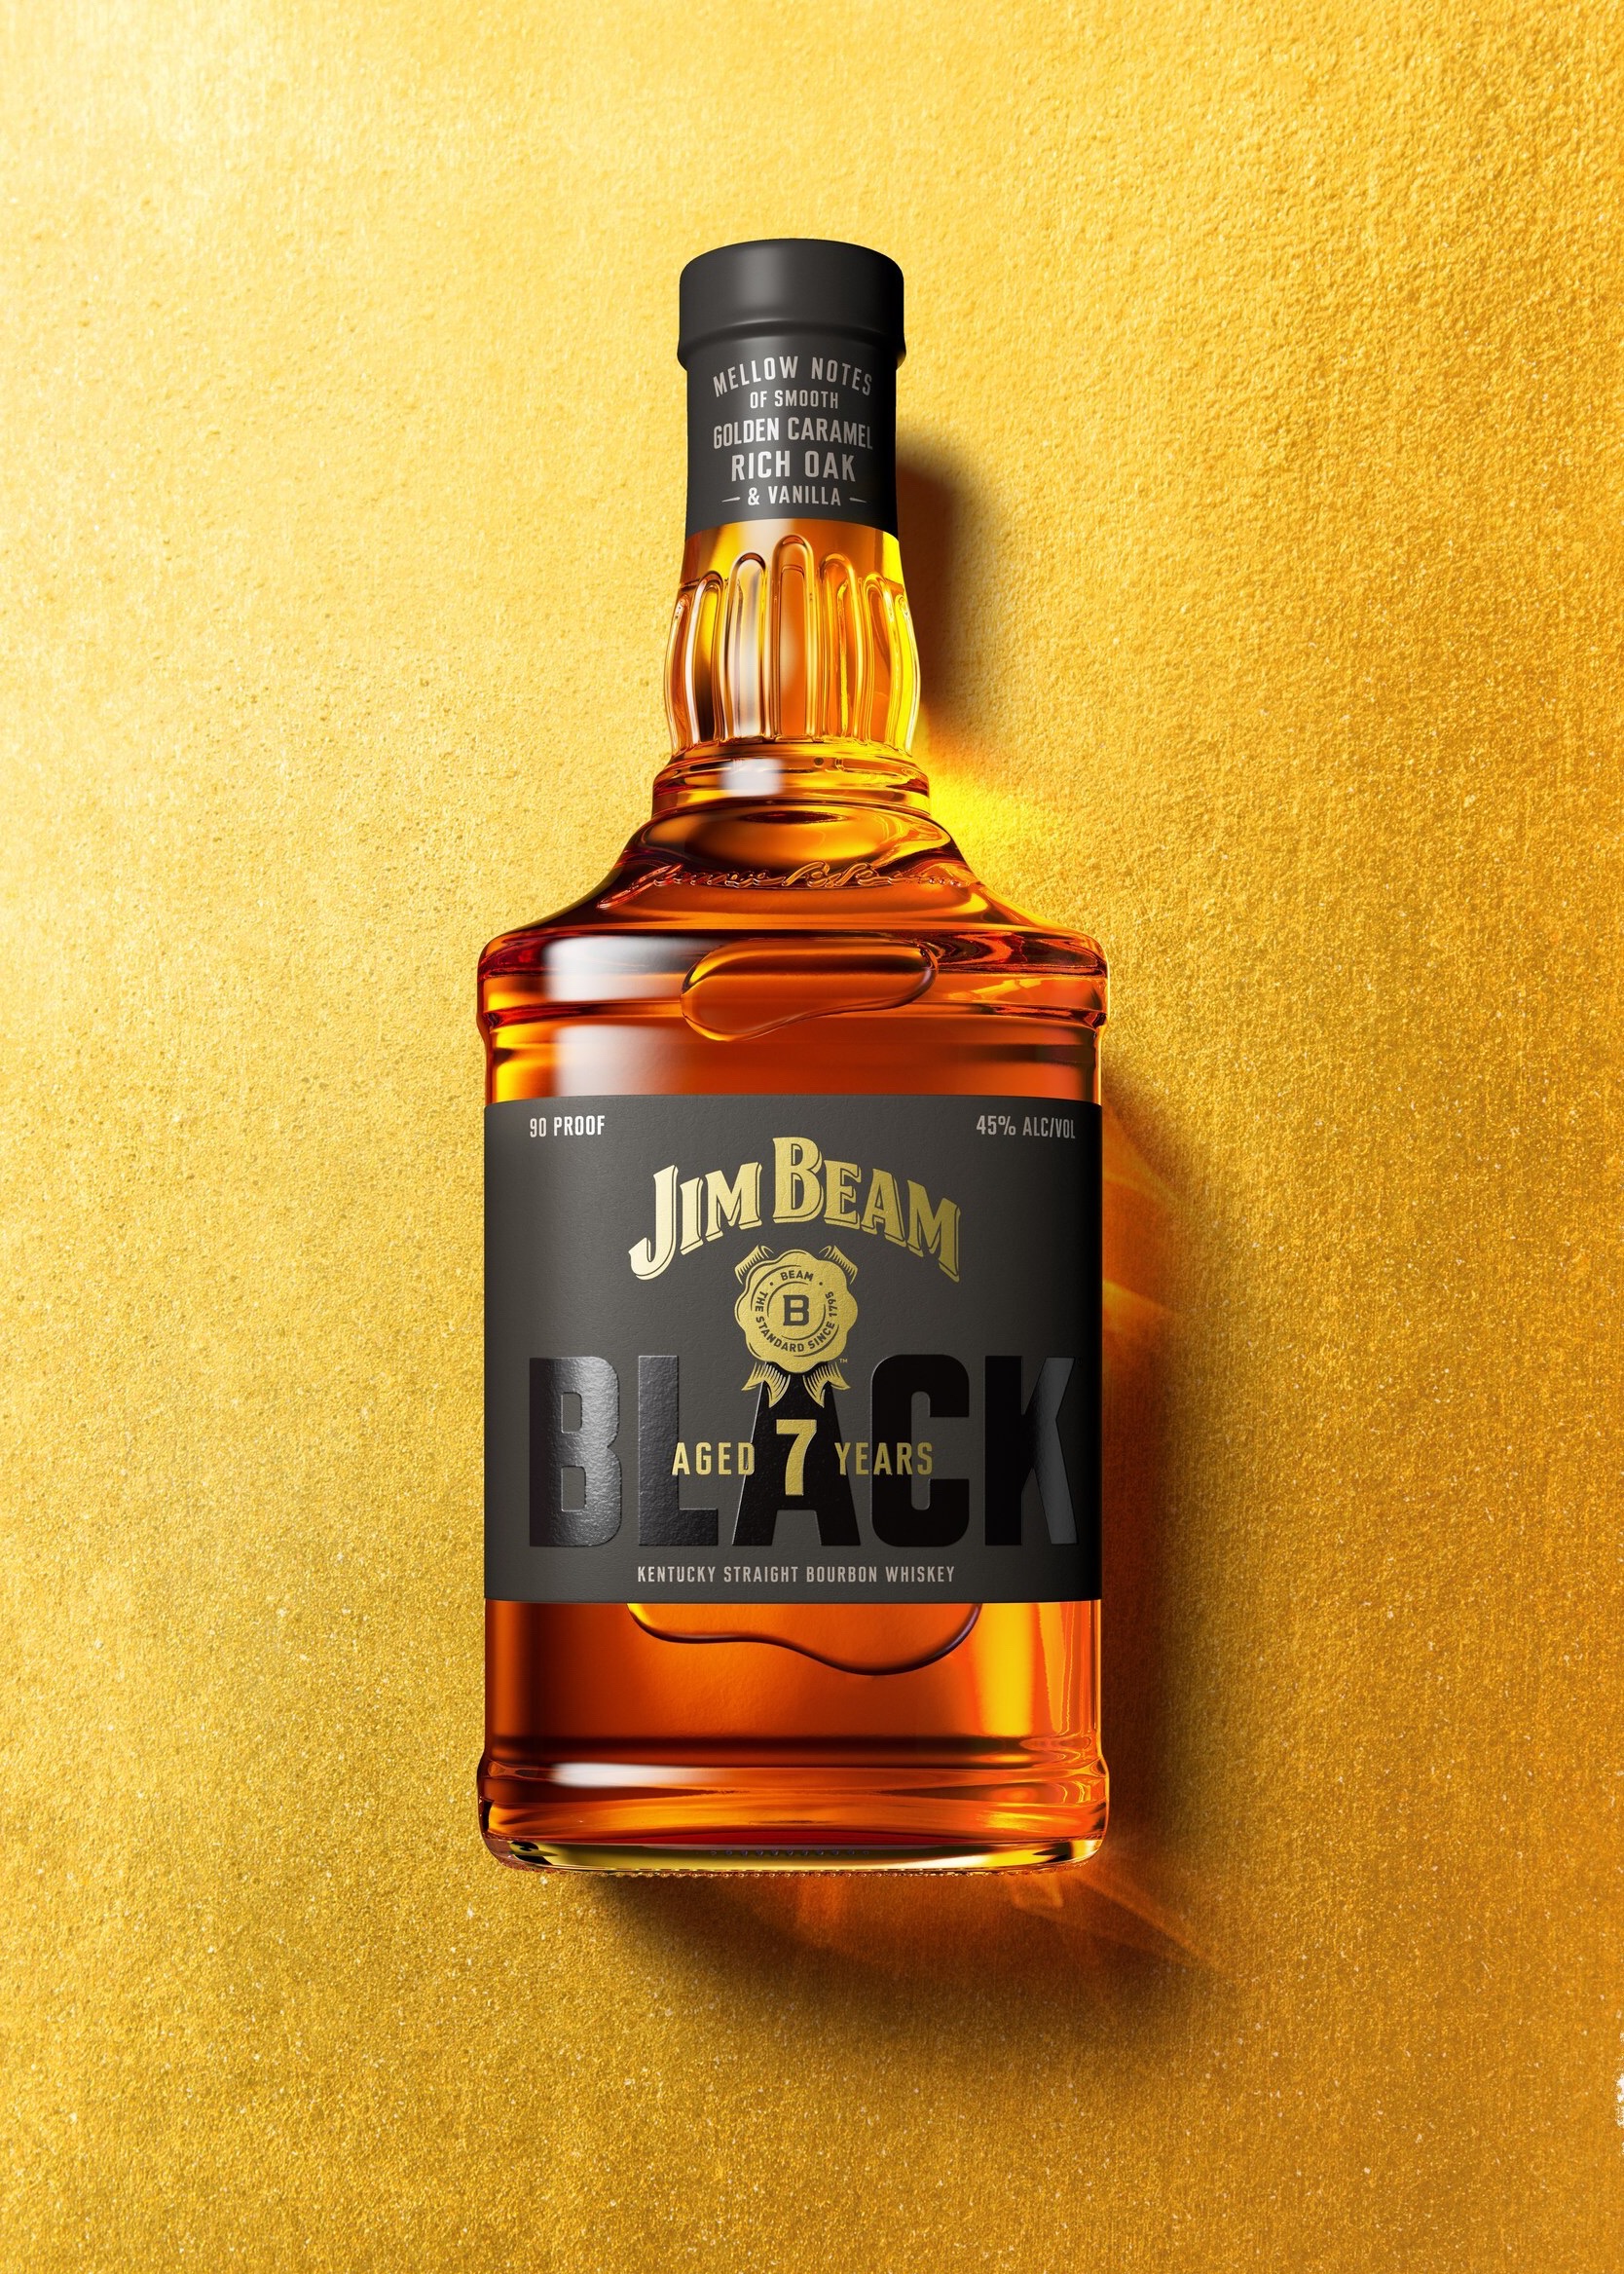 Jim Beam Black Re-Launches with New Premium Look and Age Statement